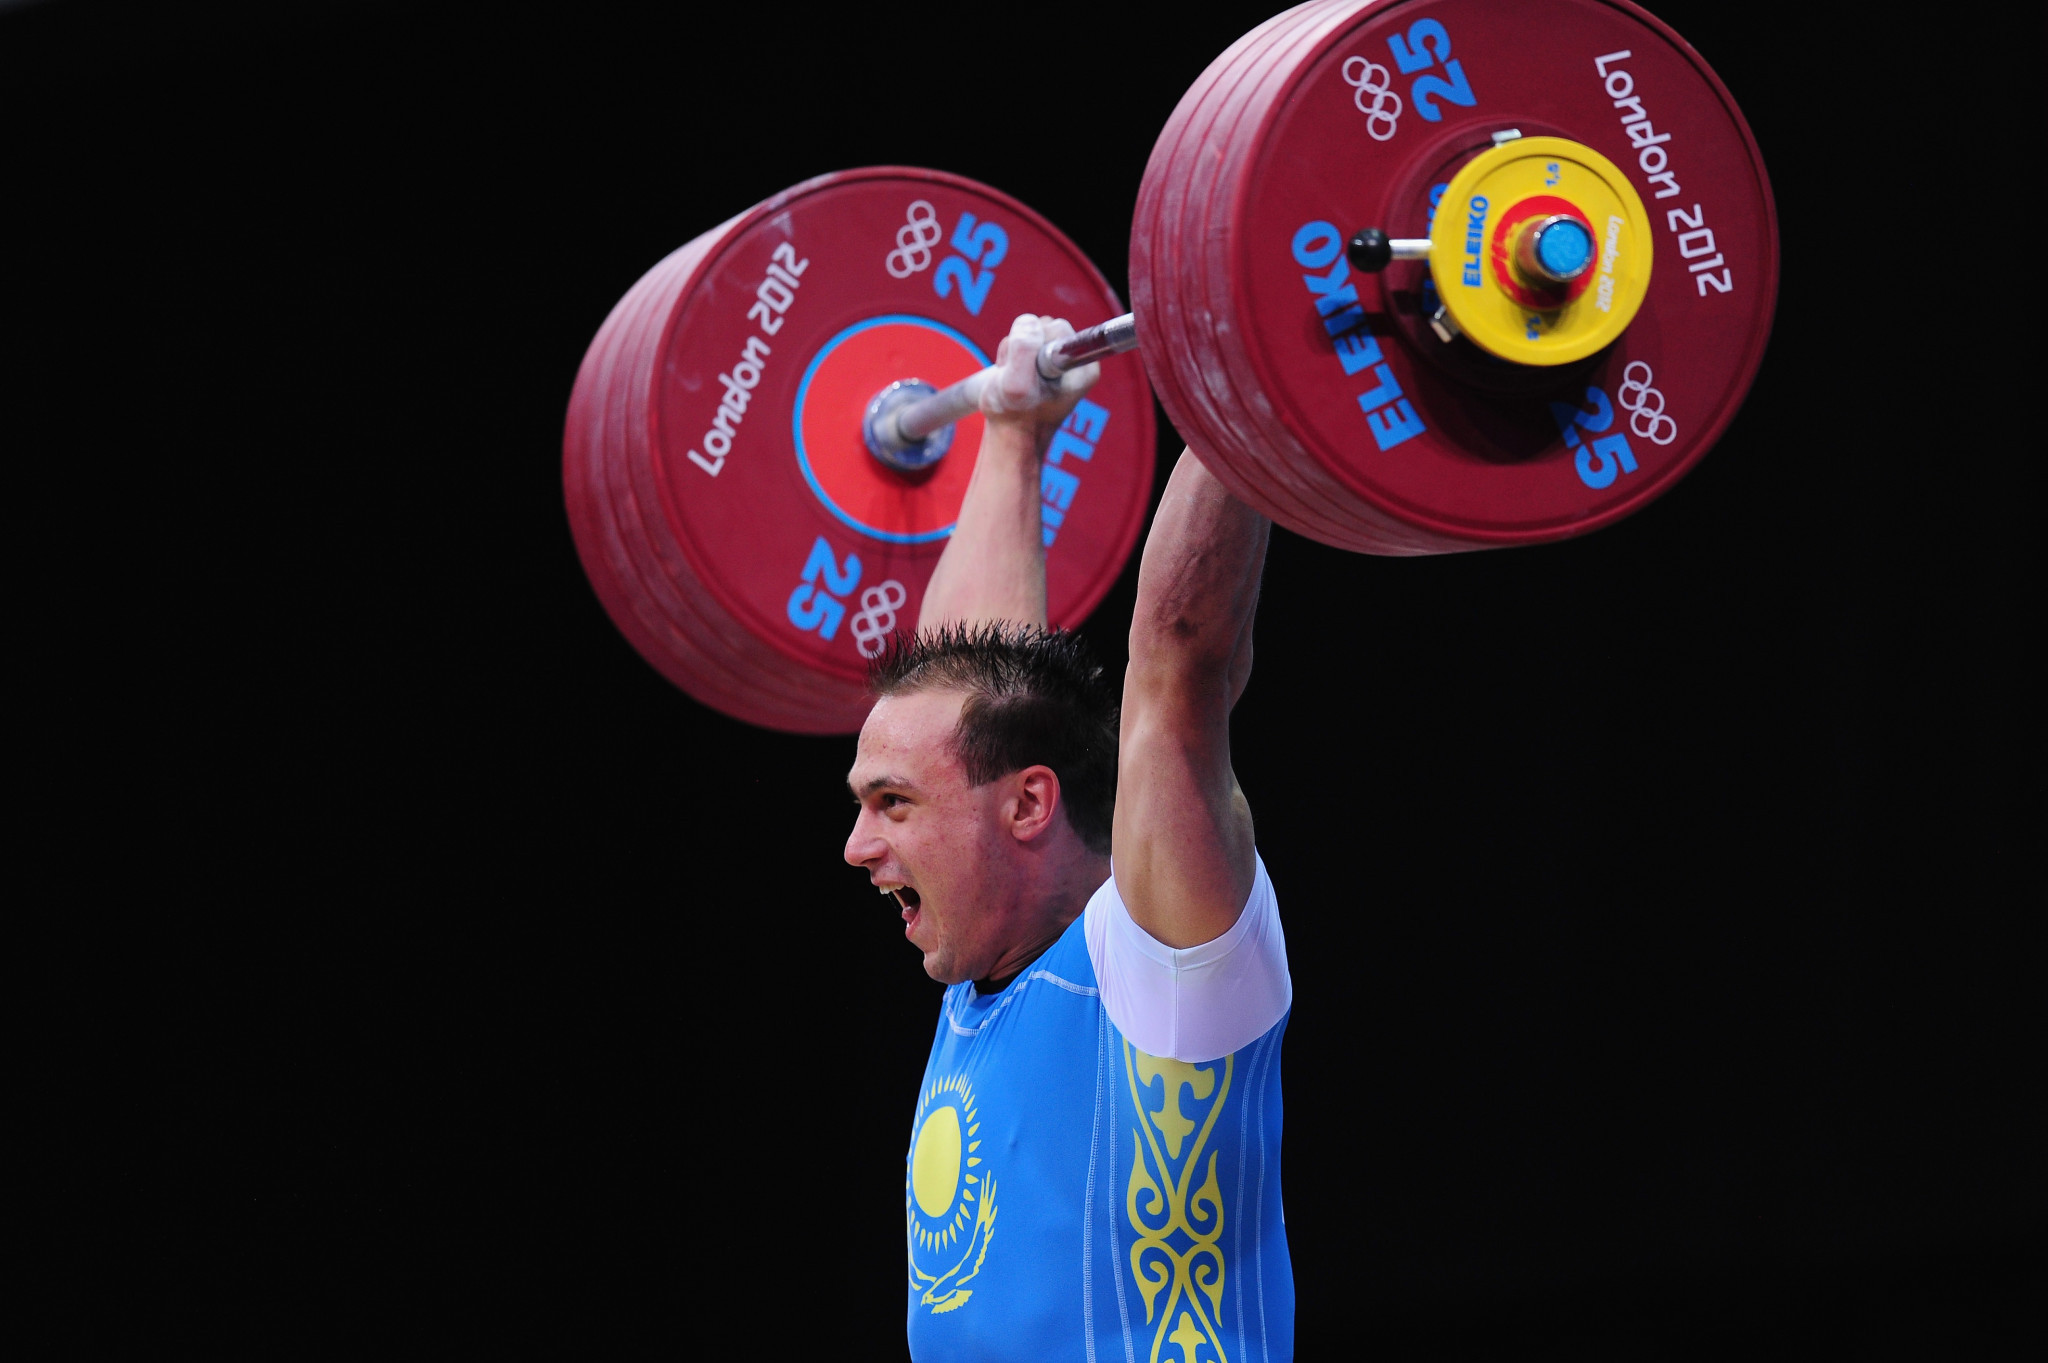  Ilya Ilyin of Kazakhstan sets a new world record and wins the gold medal in the men's 94kg weightlifting final at the London 2012 Olympic Games ©Getty Images